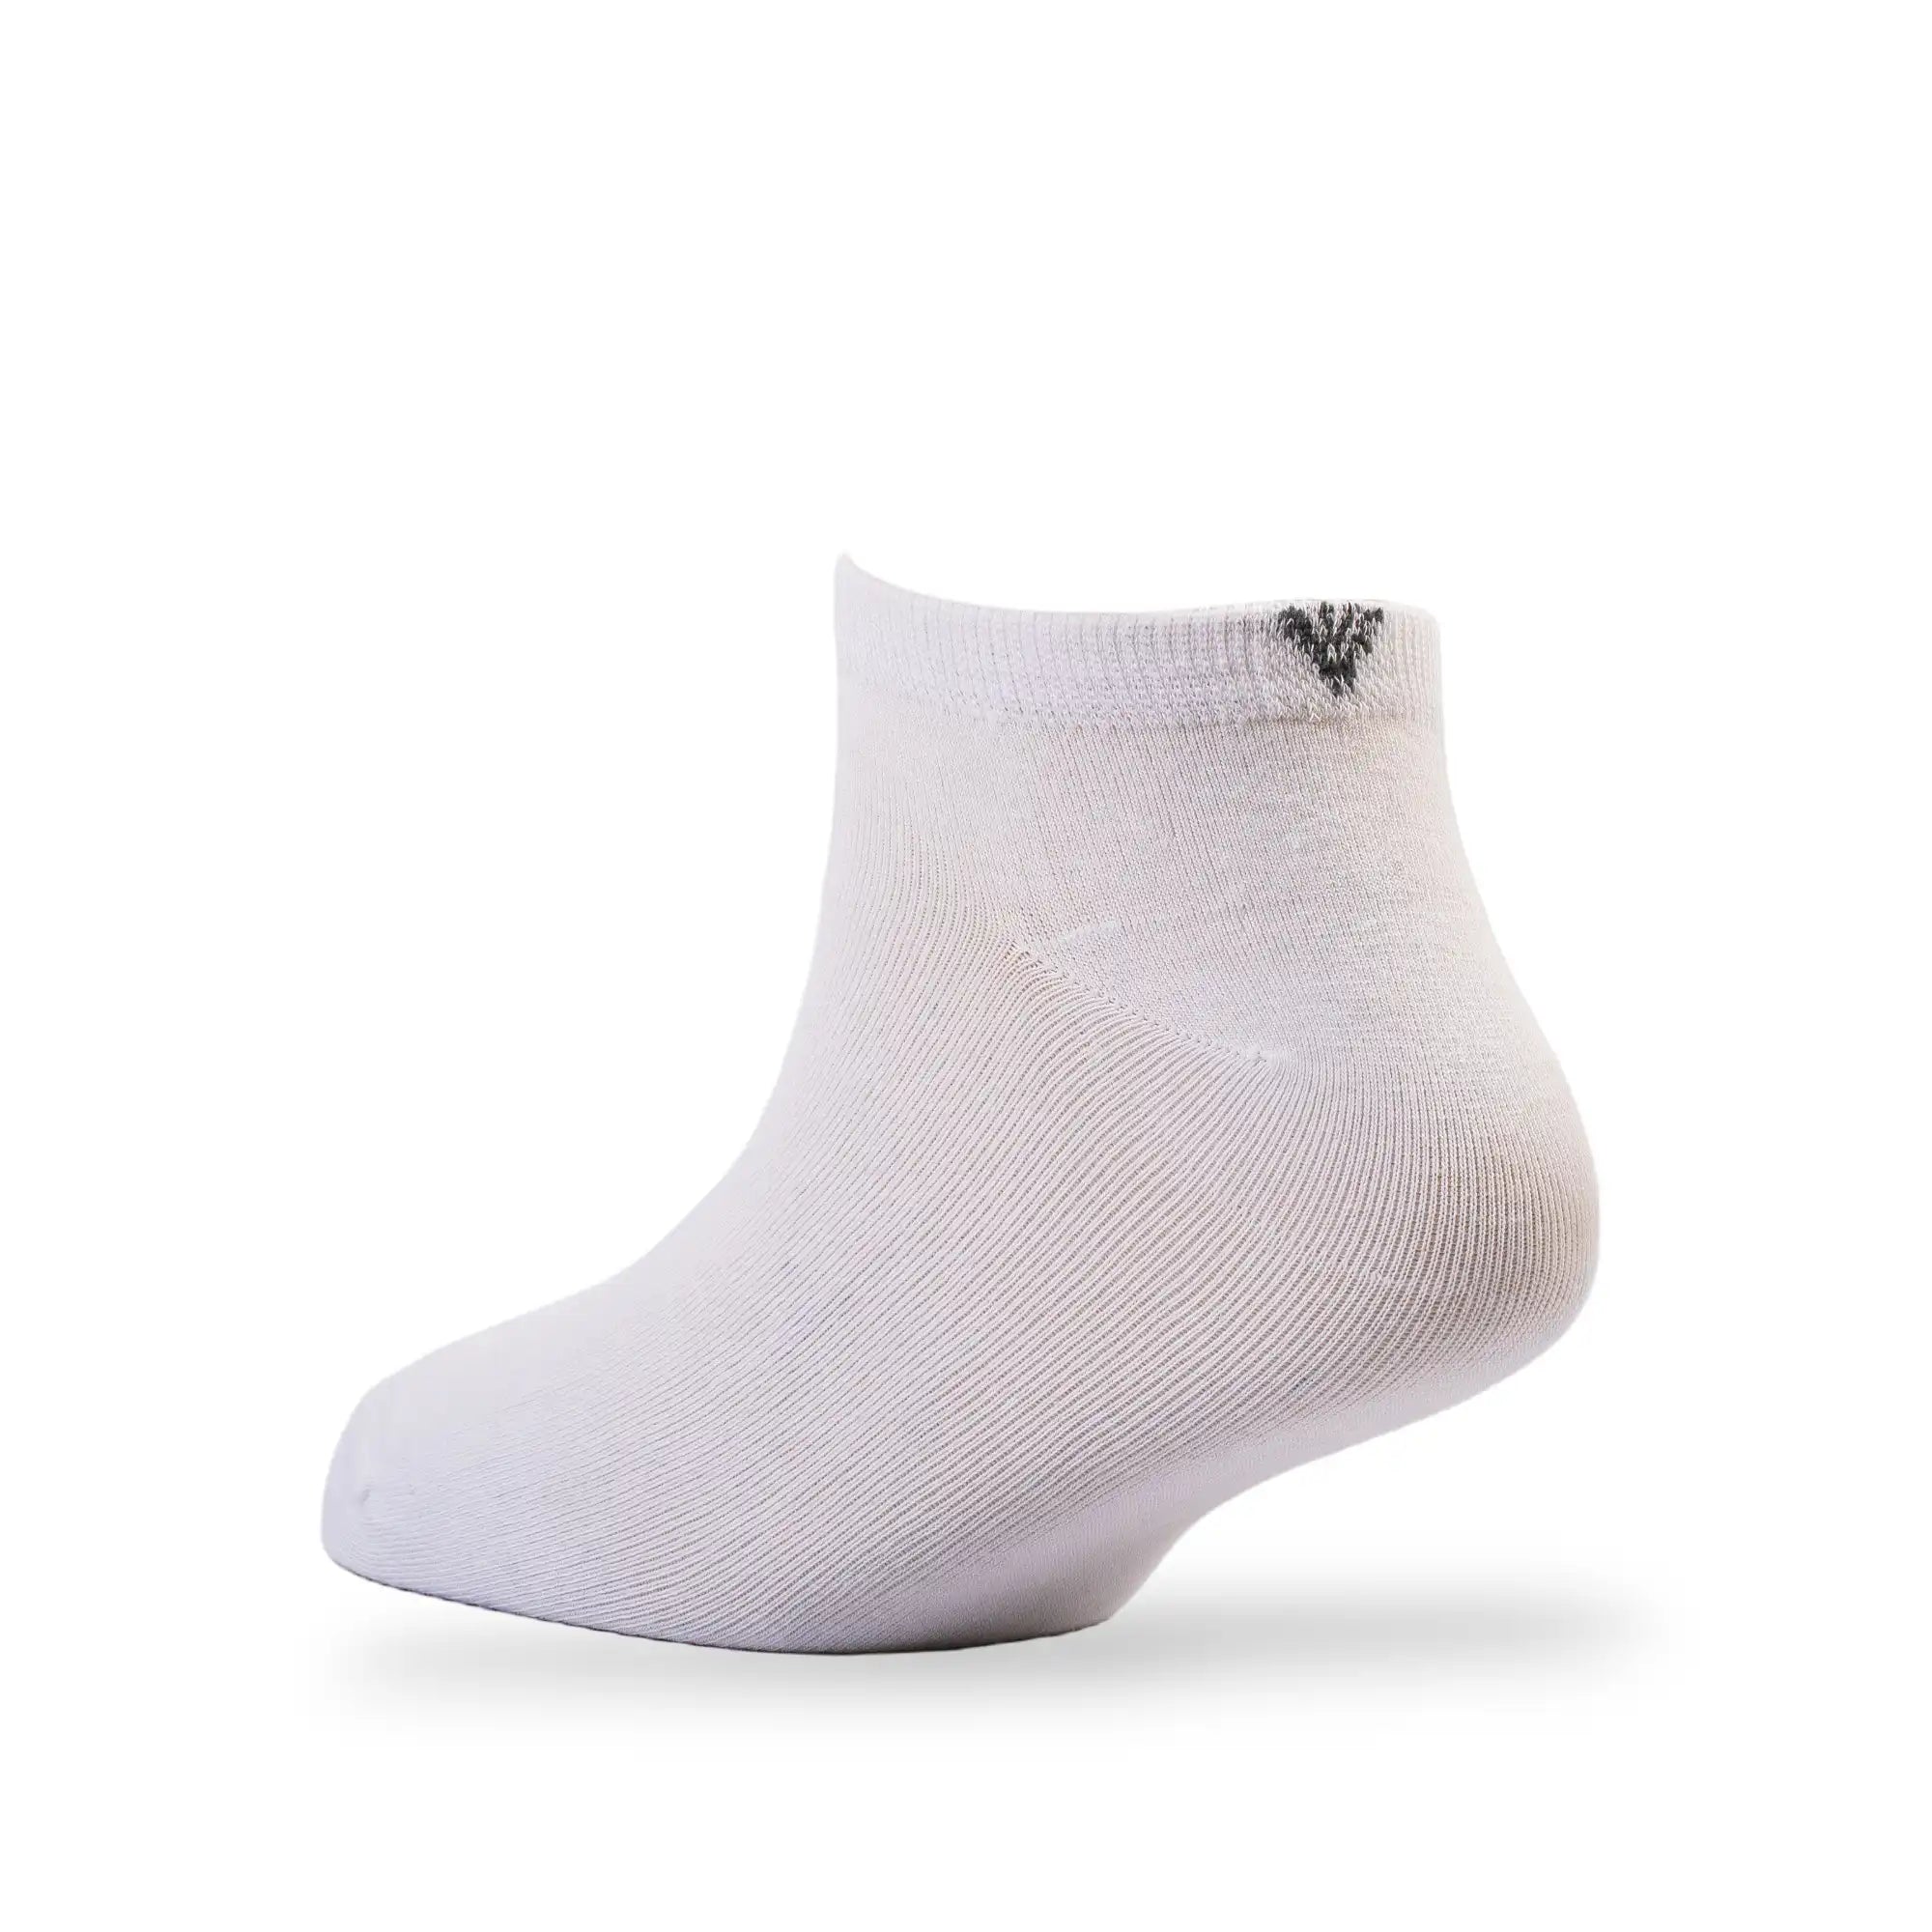 Young Wings Men's Multi Colour Cotton Fabric Solid Low Ankle Length Socks - Pack of 5, Style no. 1400-M1